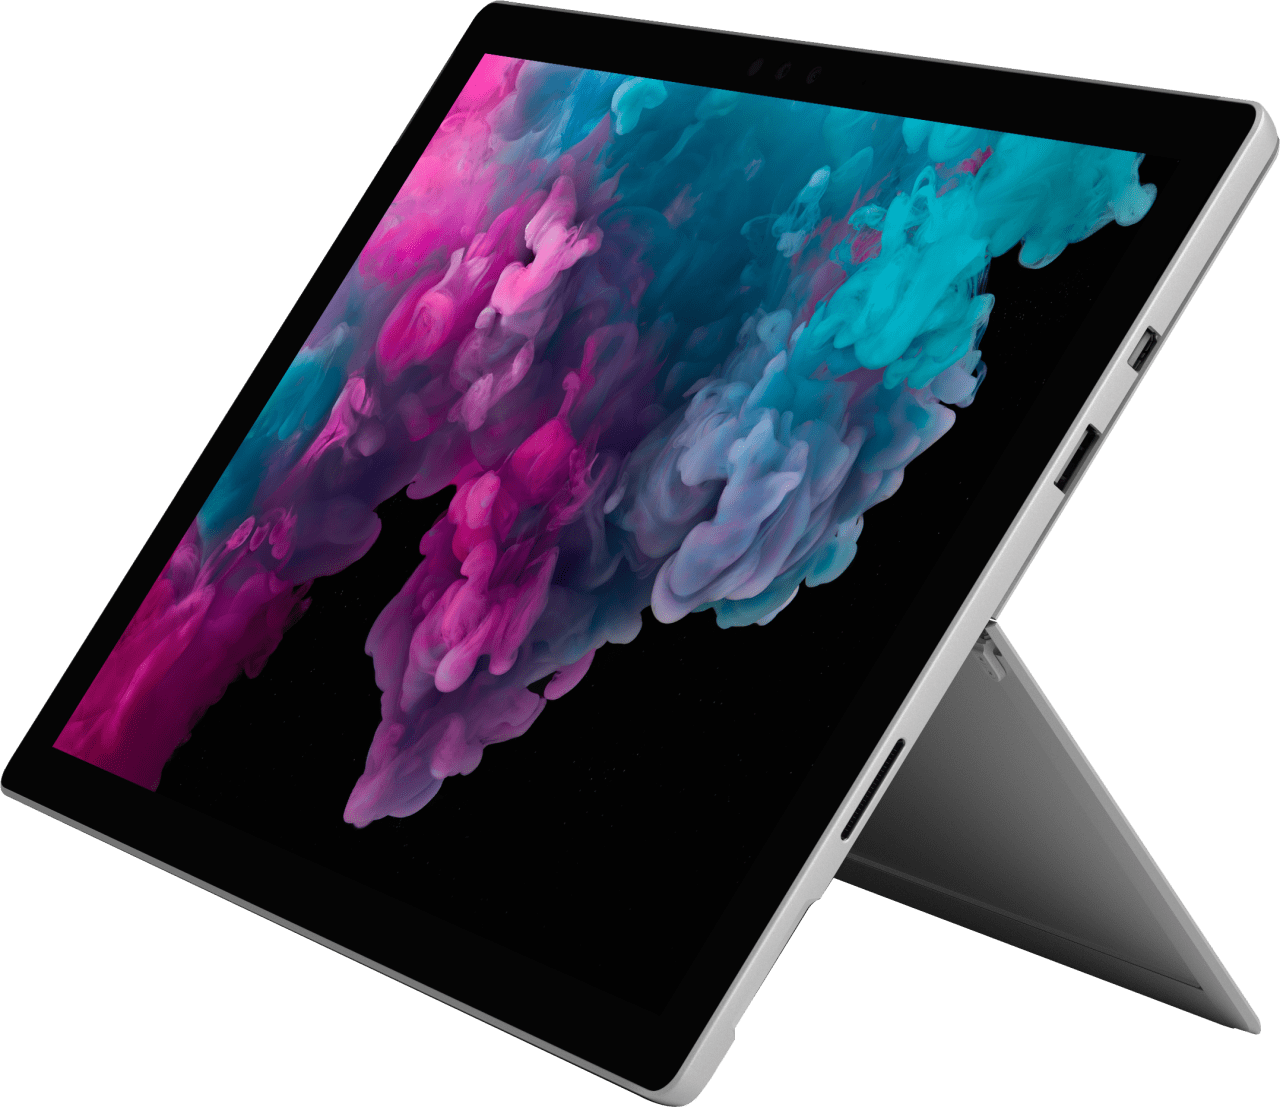 Rent Microsoft Surface Pro 6 from €39.90 per month